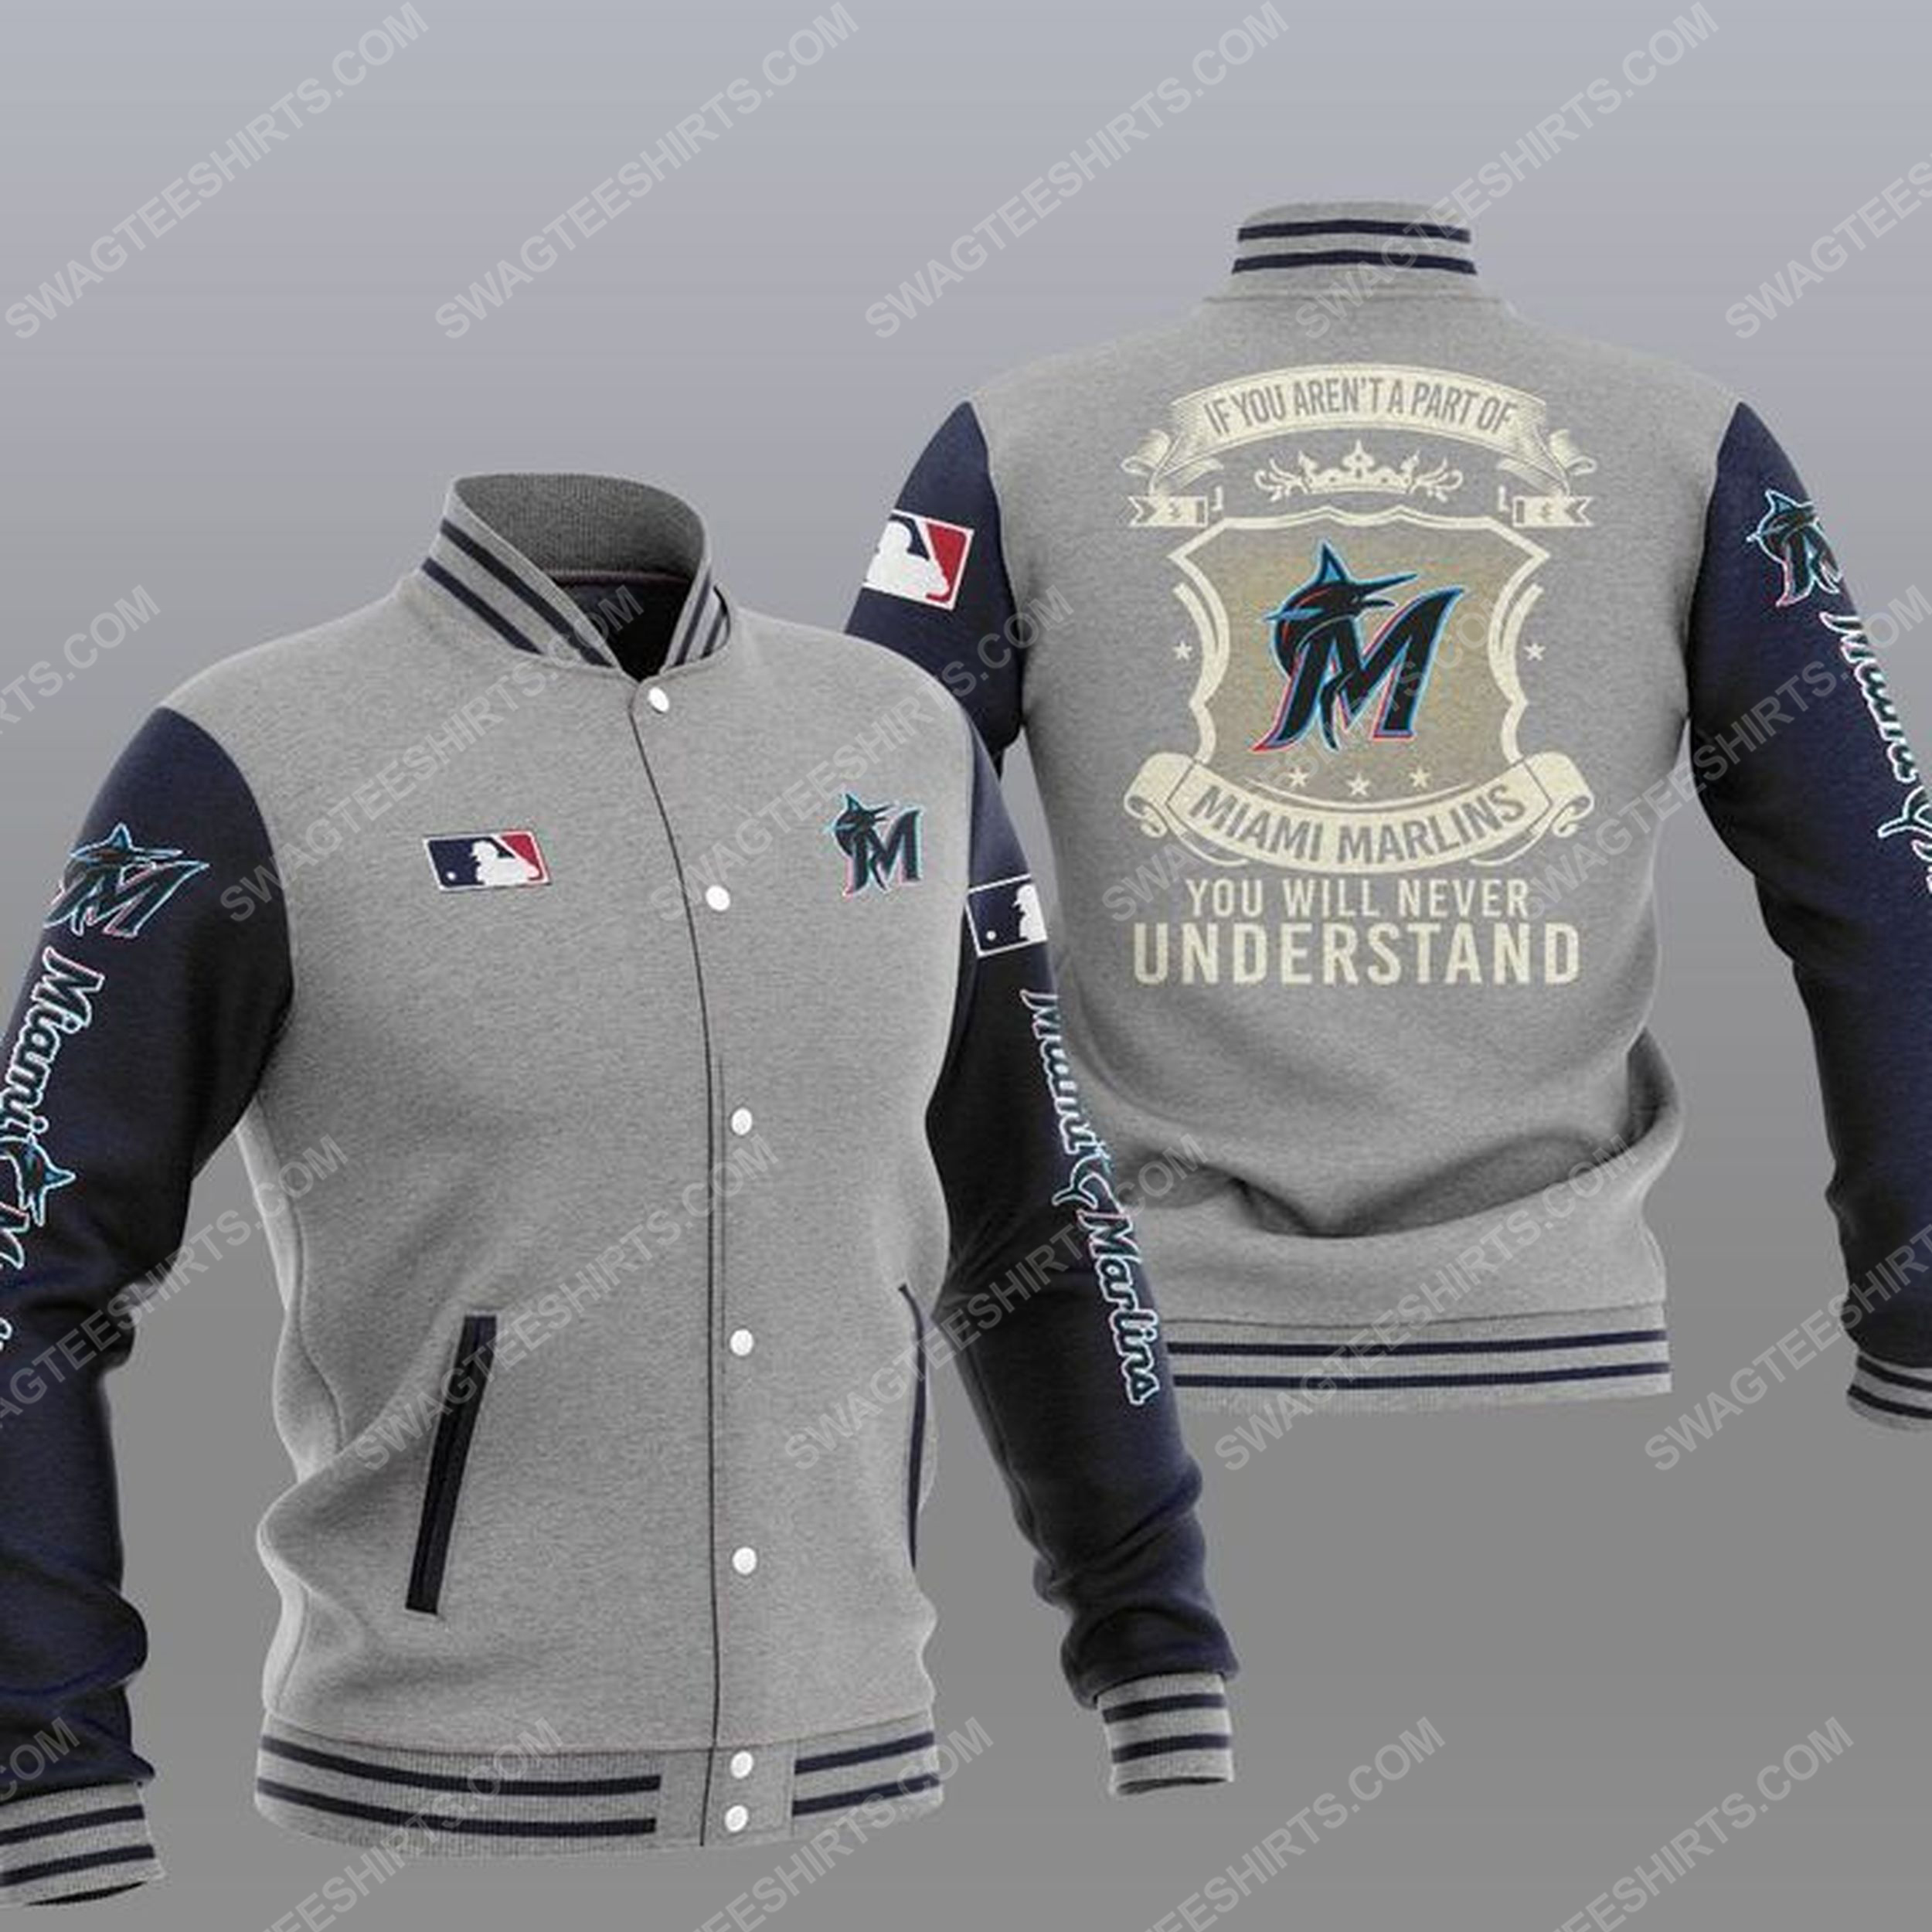 You will never understand miami marlins all over print baseball jacket - gray 1